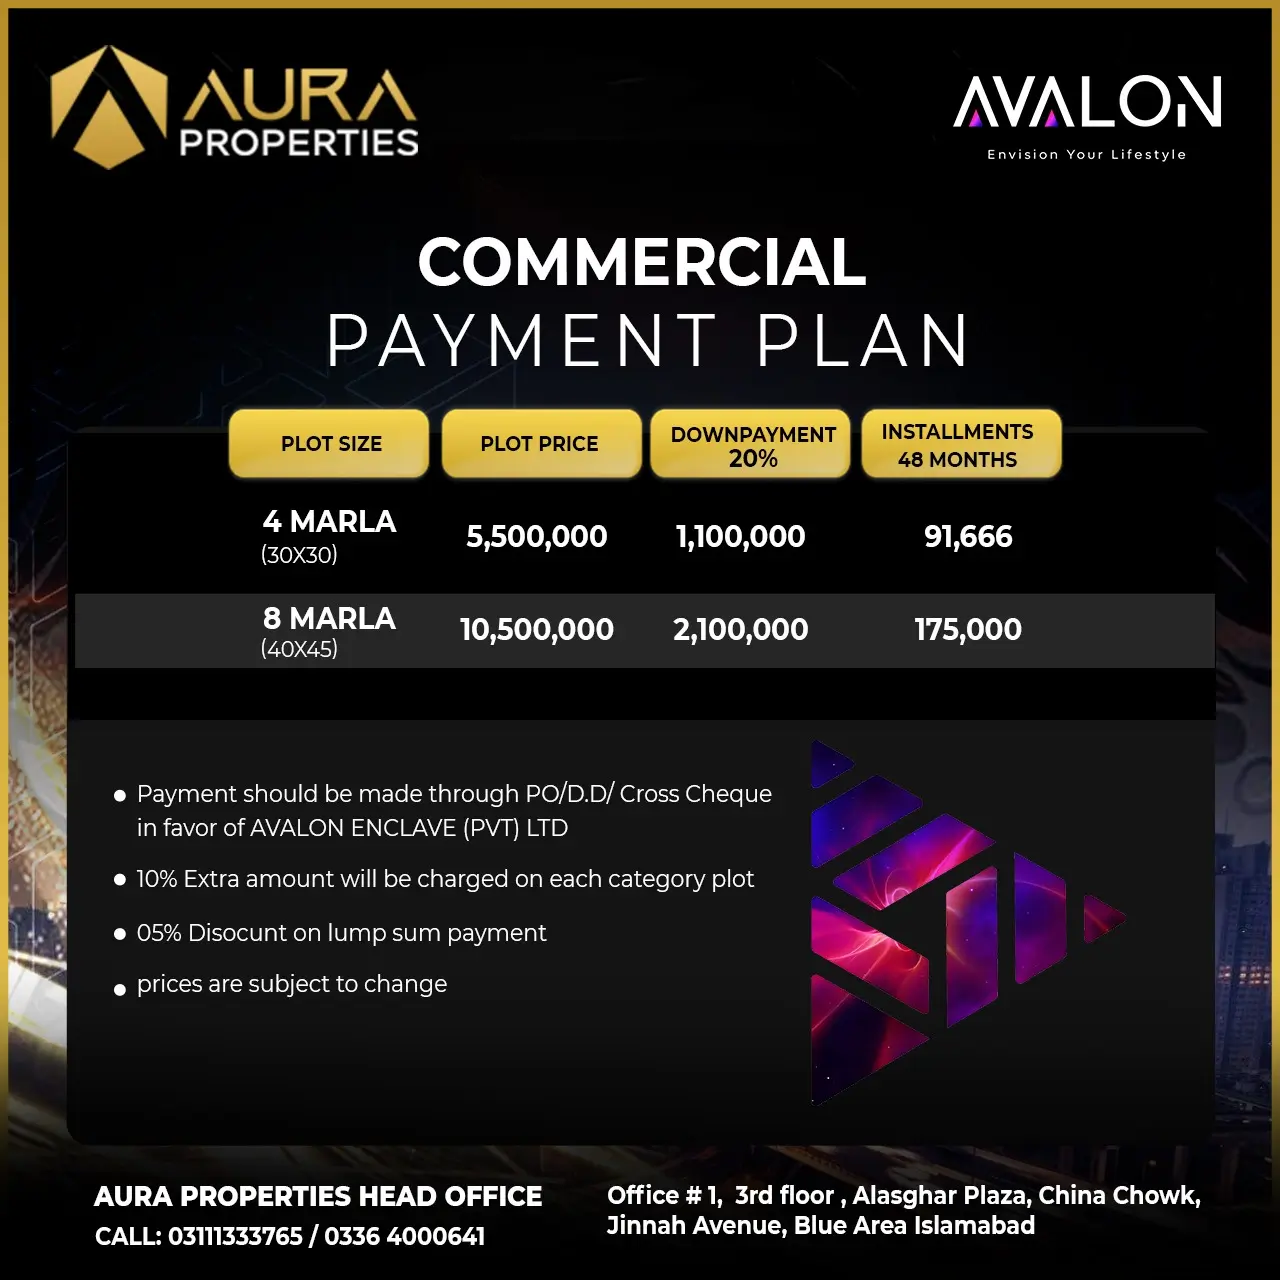  avalon city islamabad commercial payment plan